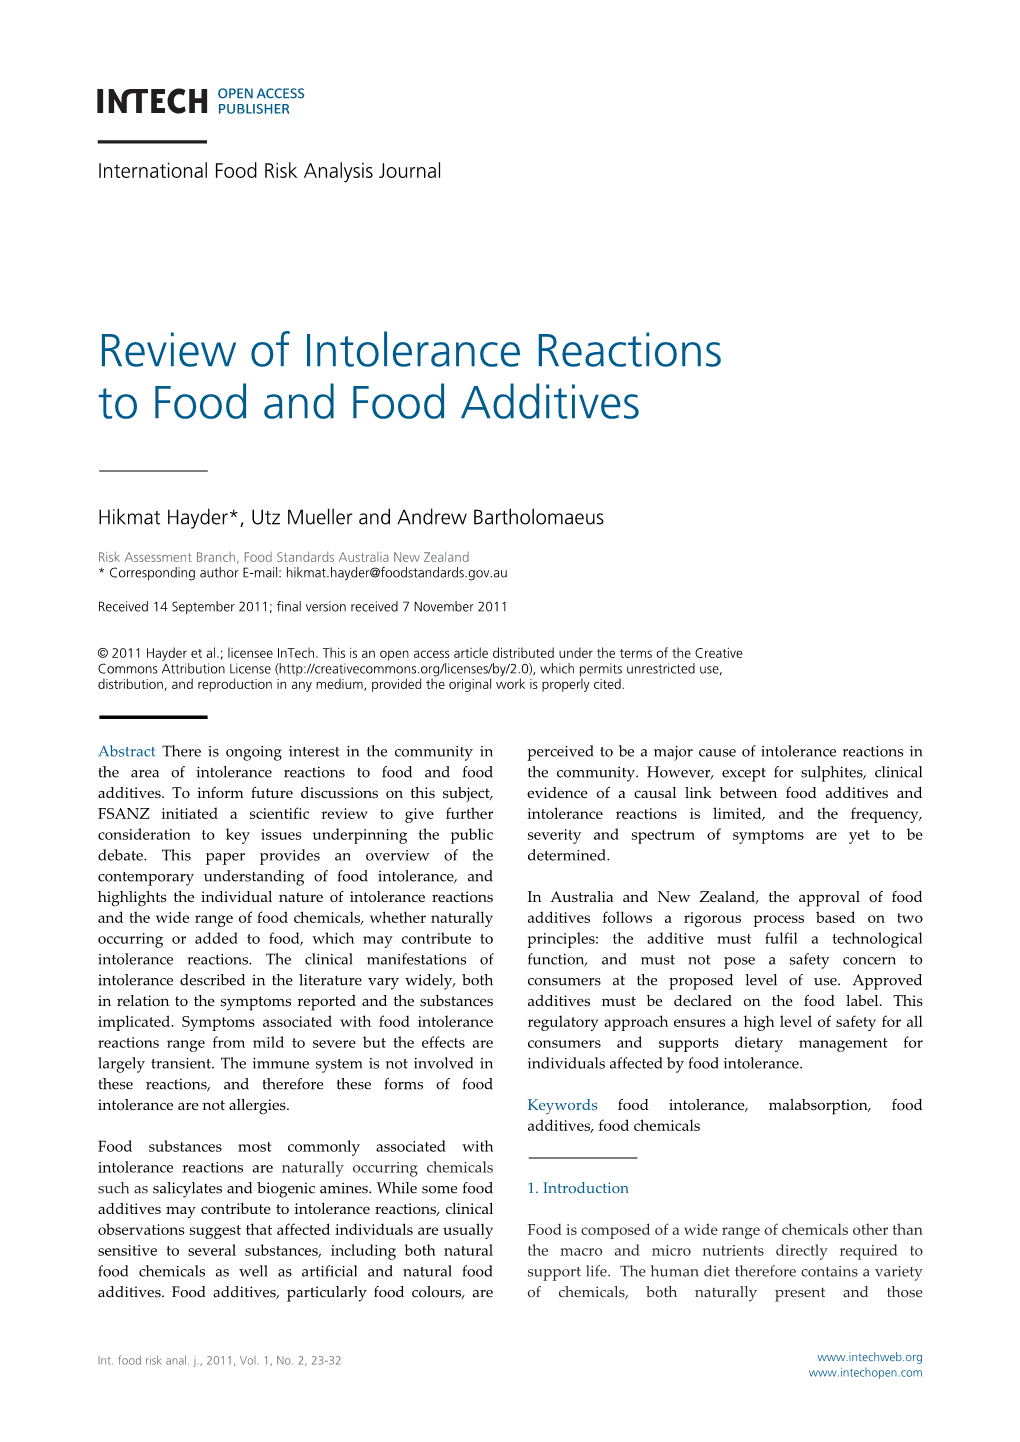 Review of Intolerance Reactions to Food and Food Additives